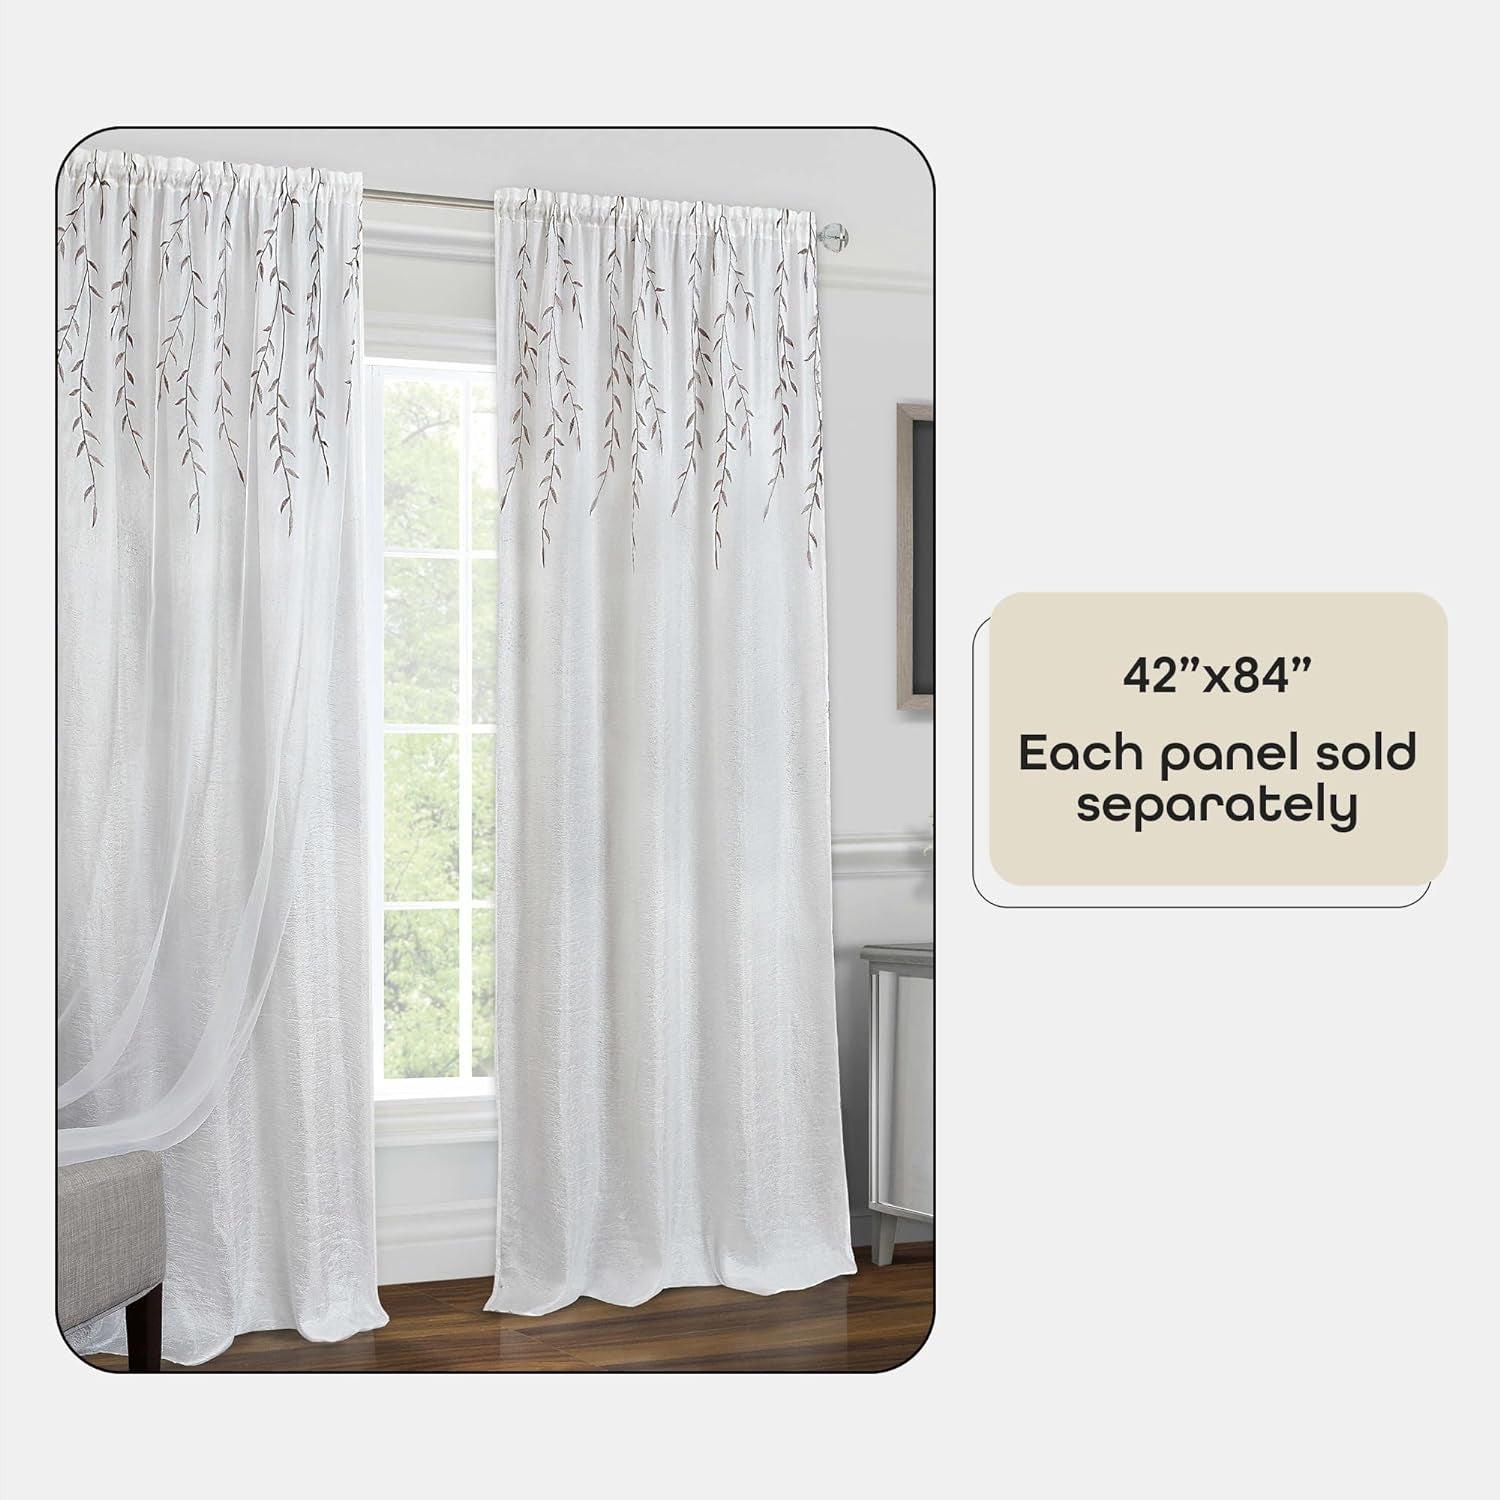 Light Filtering Rod Pocket Panel Window Curtain - 84 Inch Length, 42 Inch Width - Grey - Room Darkening & Machine Washable Soft Polyester Drapes for Bedroom Living & Dining Room by Achim Home Decor  Achim Home Furnishings   